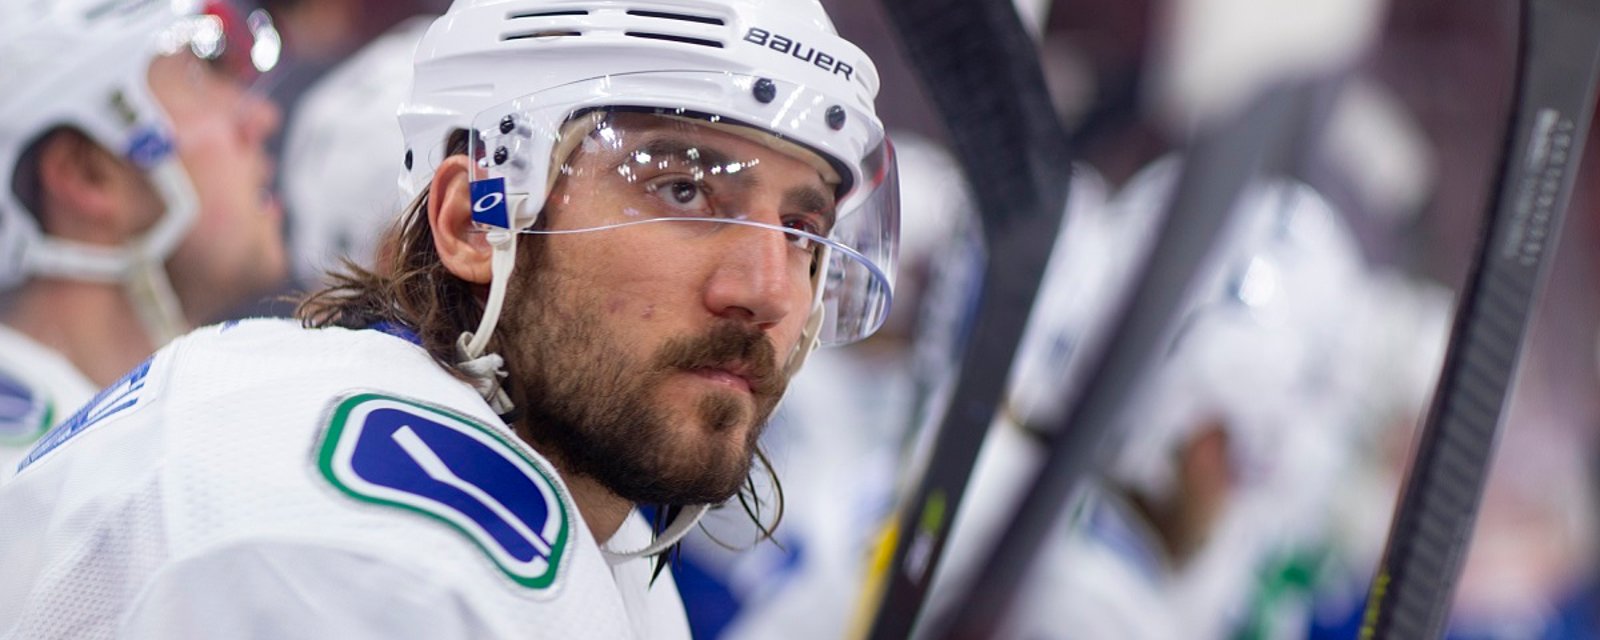 Tanev officially leaves the Canucks, signs late night deal with rival team.